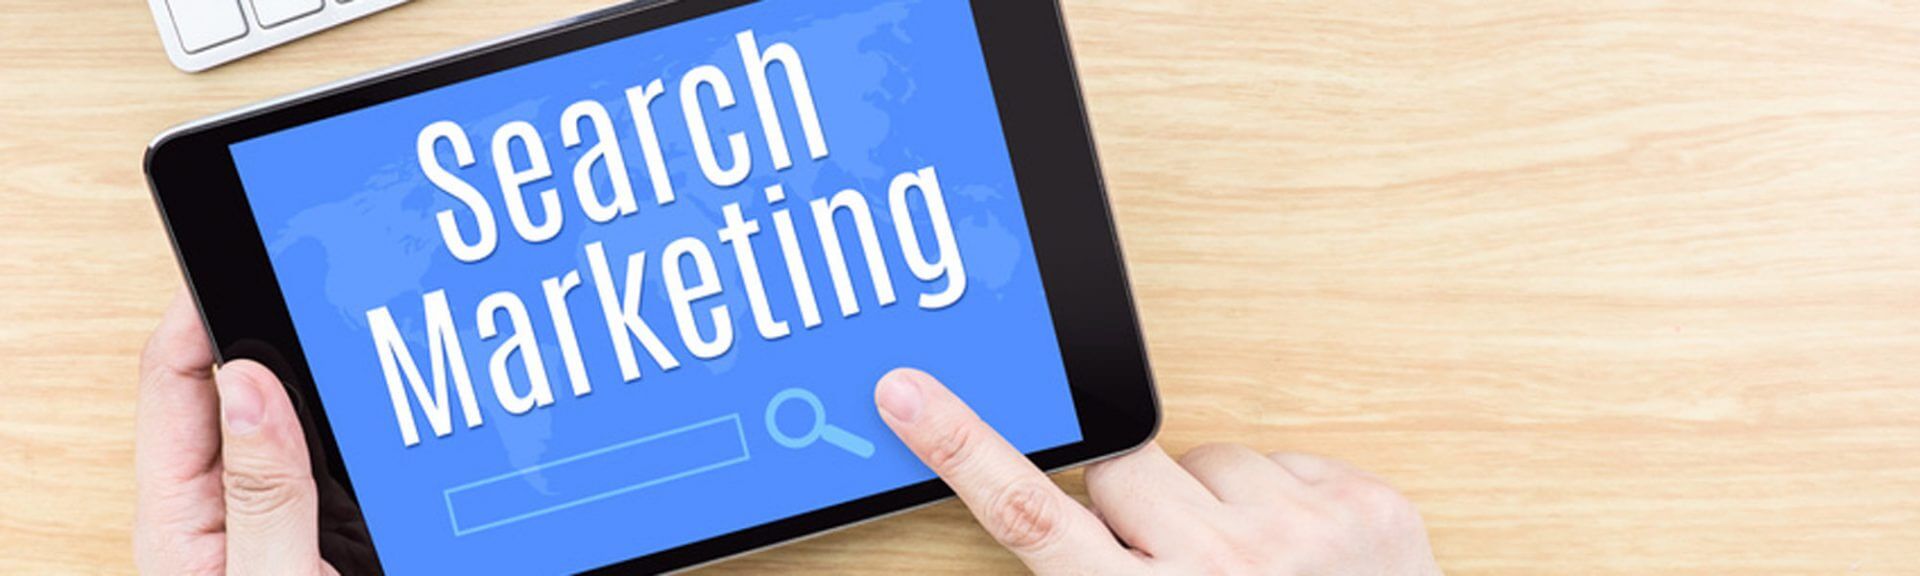 Tablet - Search Marketing